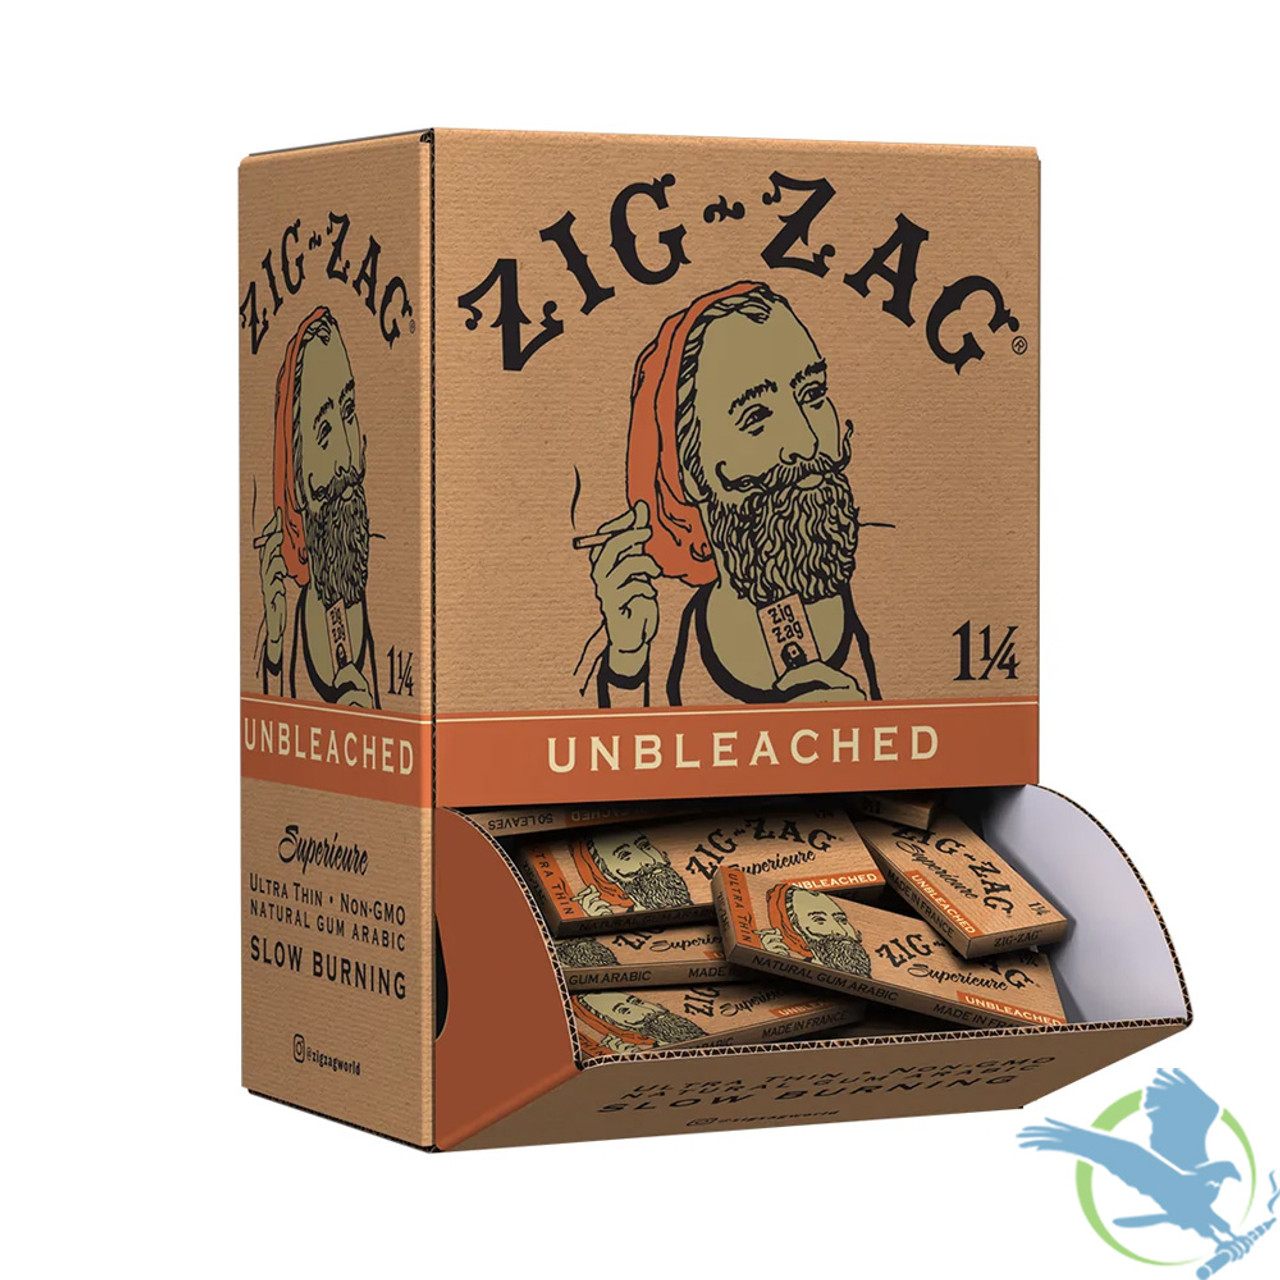  Zig-Zag Rolling Papers - 1 1/4 French Orange Rolling Papers -  Natural Gum Arabic - 78 MM - 24 Booklets with 32 Papers per Booklet :  Health & Household